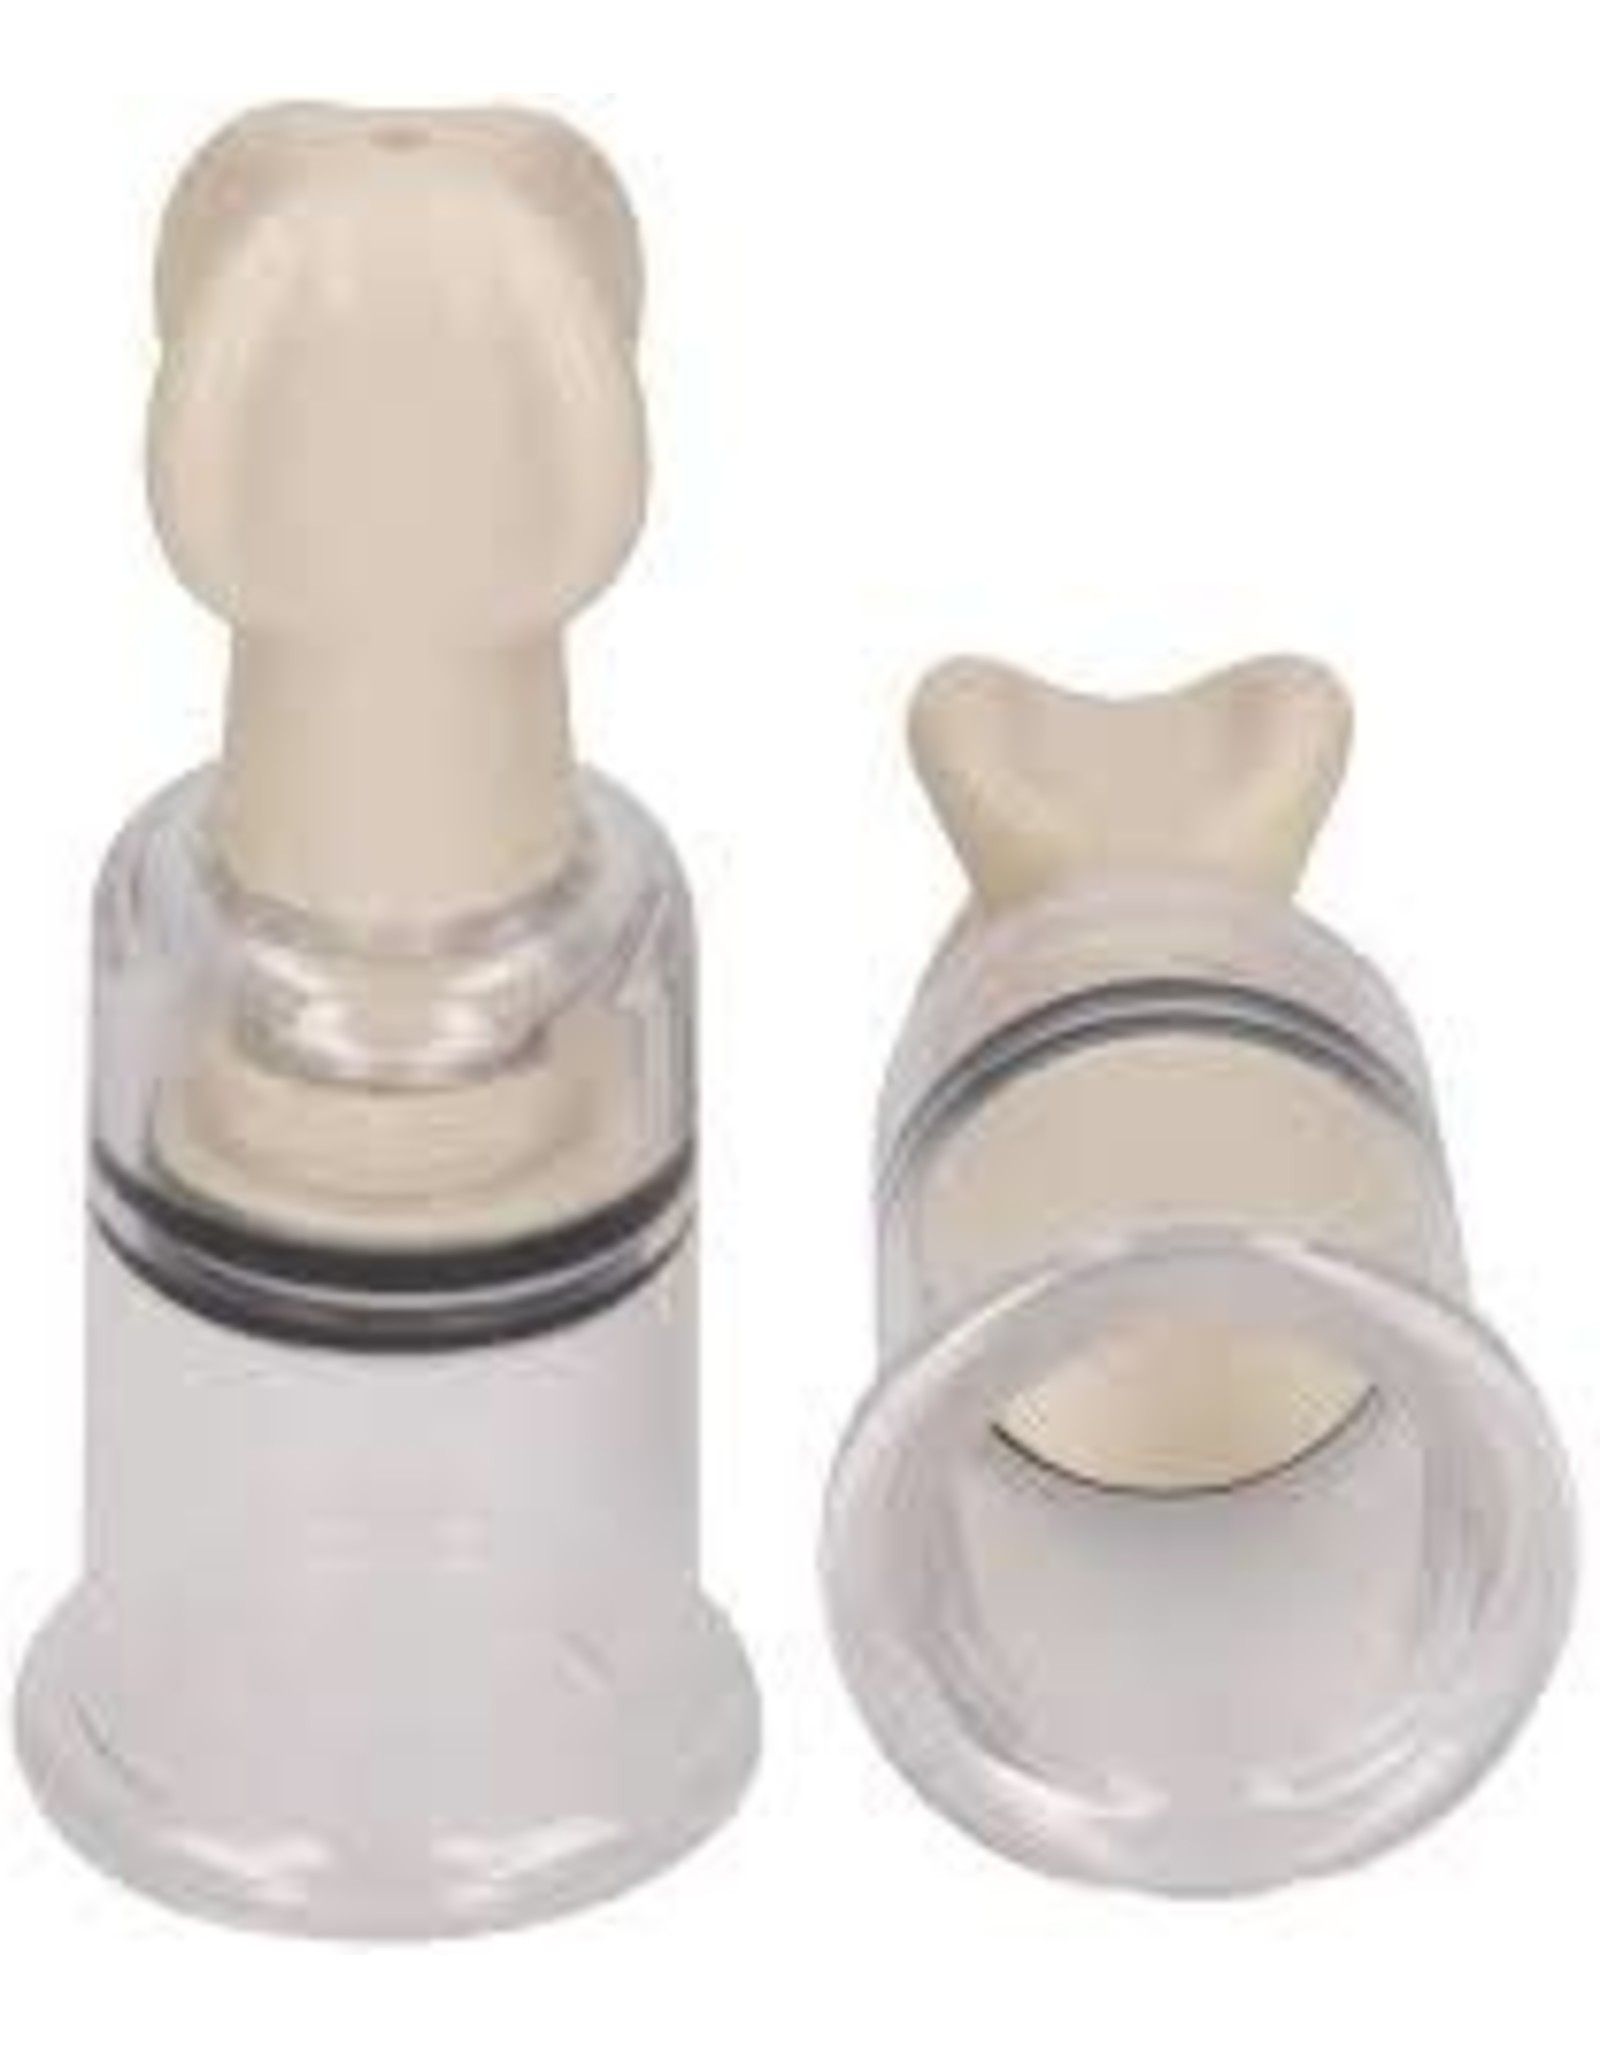 Ouch! Small Suction cup Nipple Enhancers